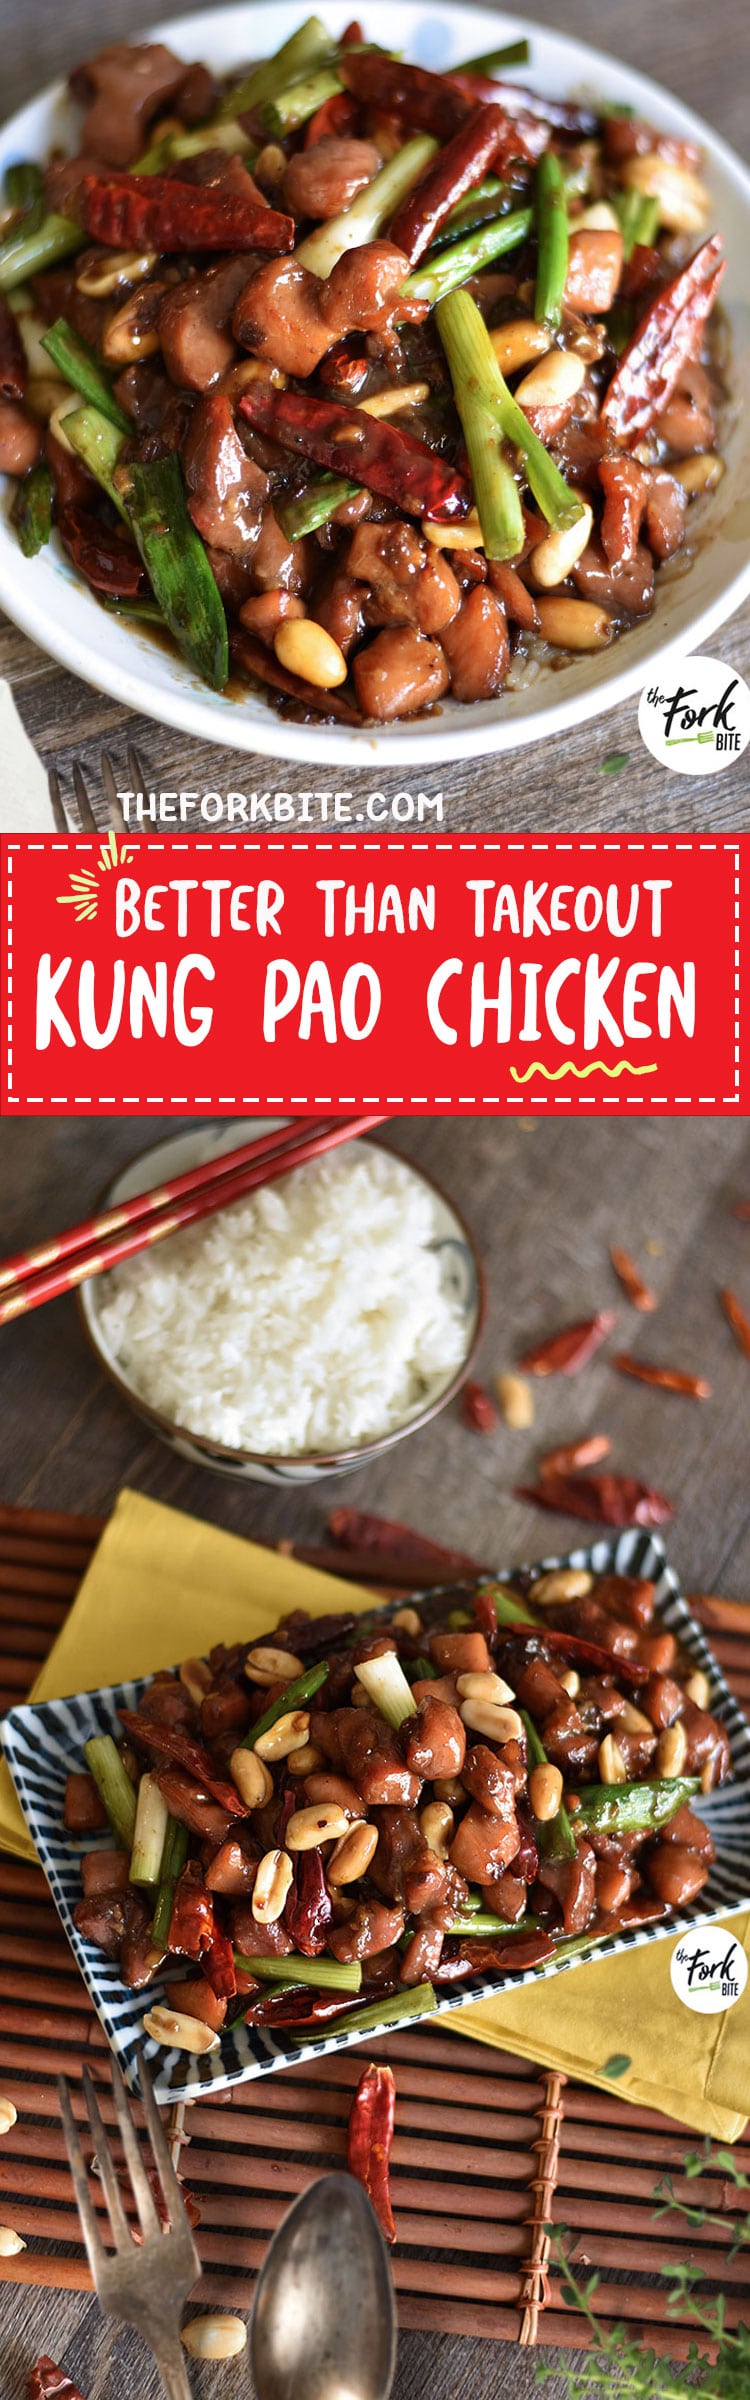 #KungPaoChicken - Do you enjoy Kung Pao Chicken? This is a good recipe to start with. Hey, you could even adapt it to your own tastes. After a few tries, you will probably never order it to go again.